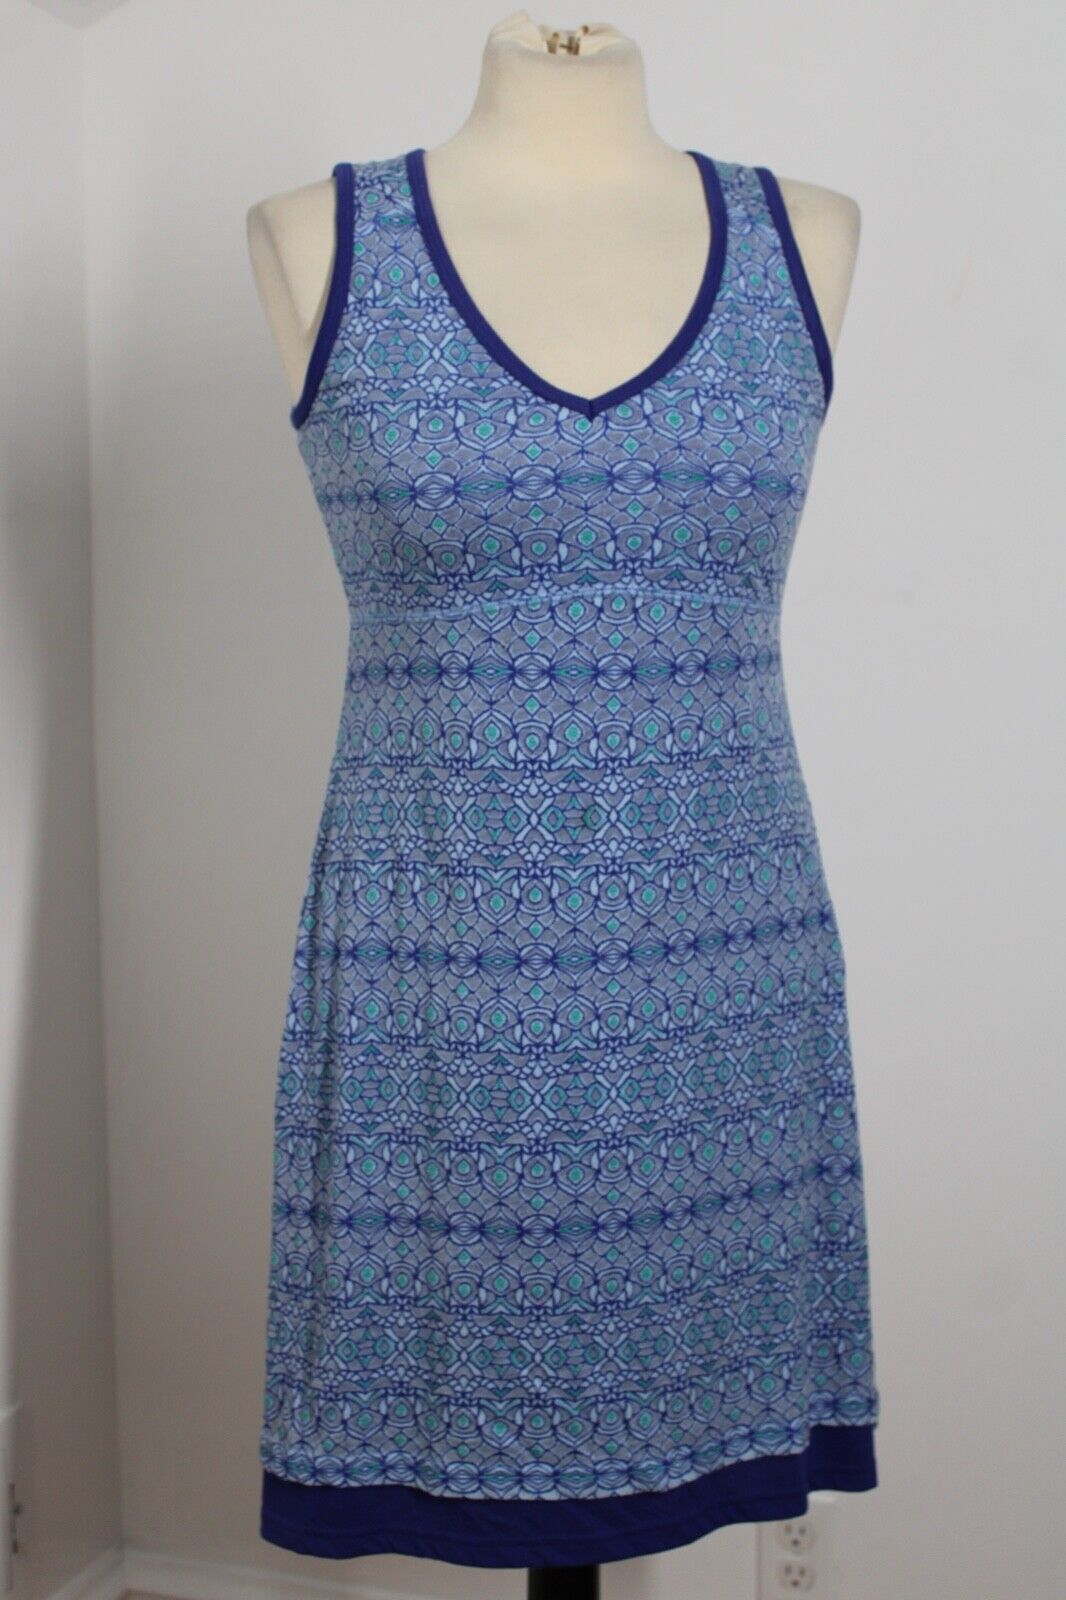 Primary image for Marmot S Blue Geometric Layered Active Tank Dress